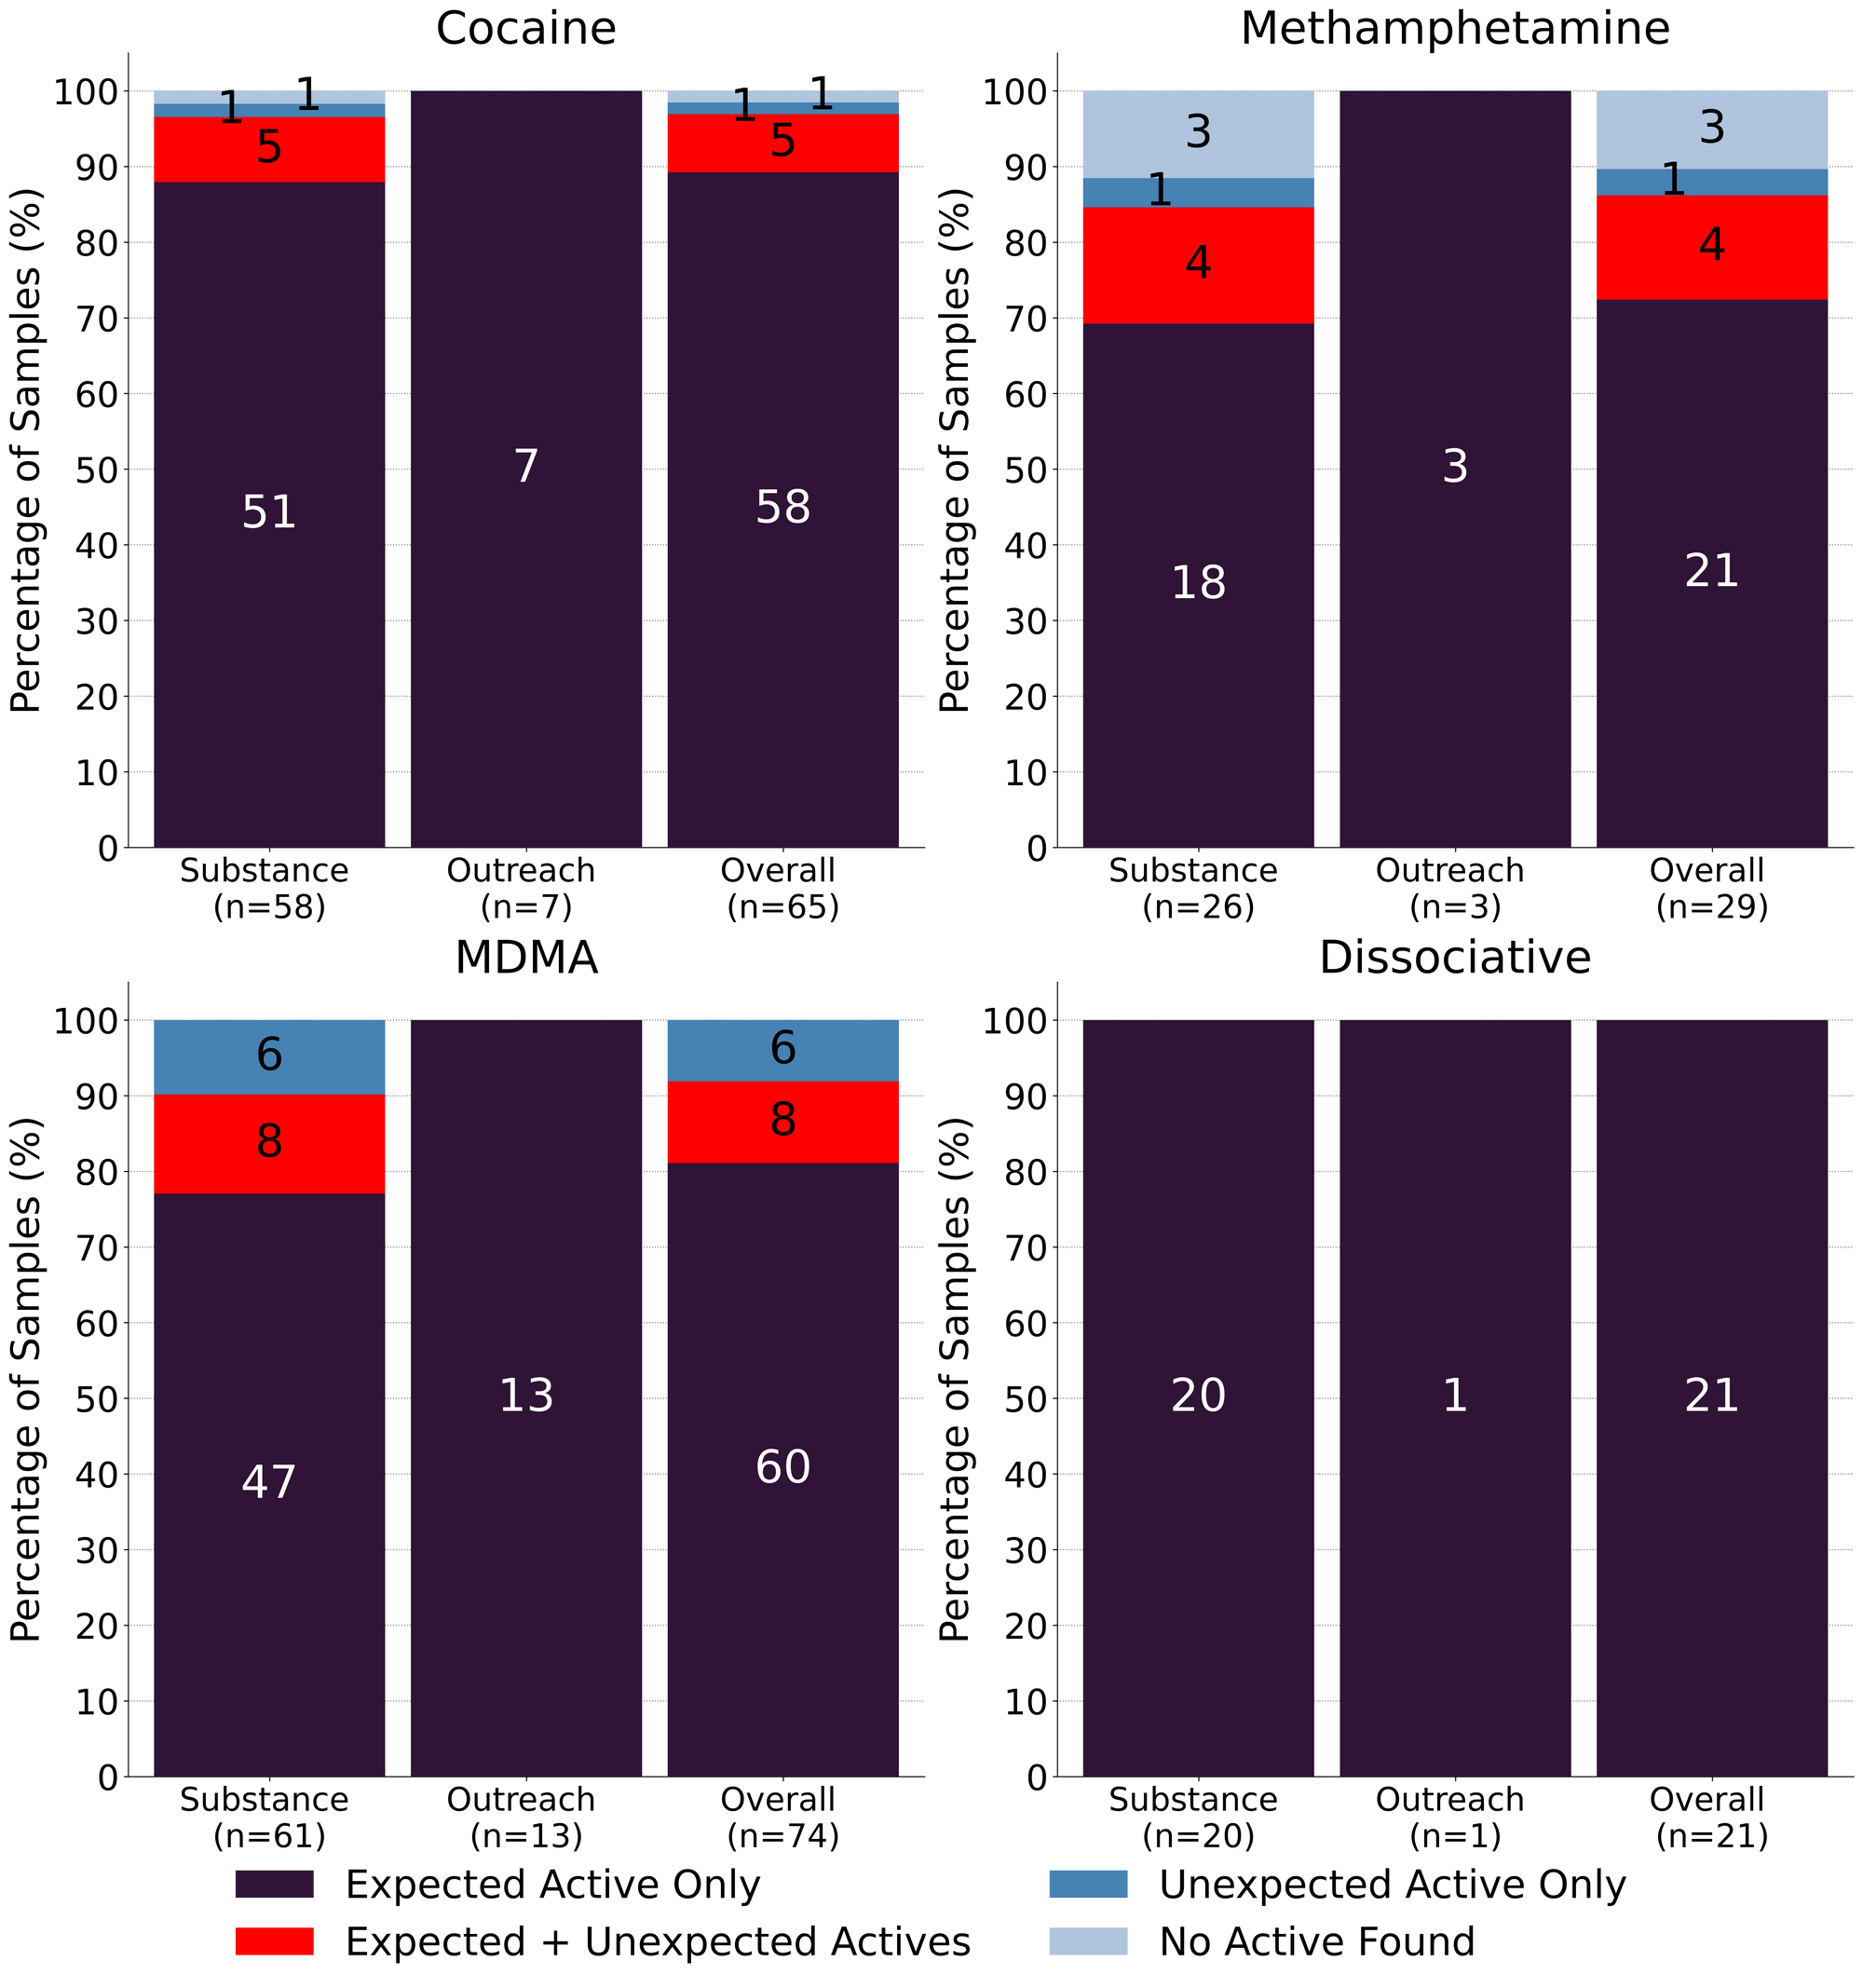 Figure 2. Adulteration breakdown by drug class and sample collection location/method. Bars are stacked by percentage of samples in each category, with the individual sample counts overlaid.